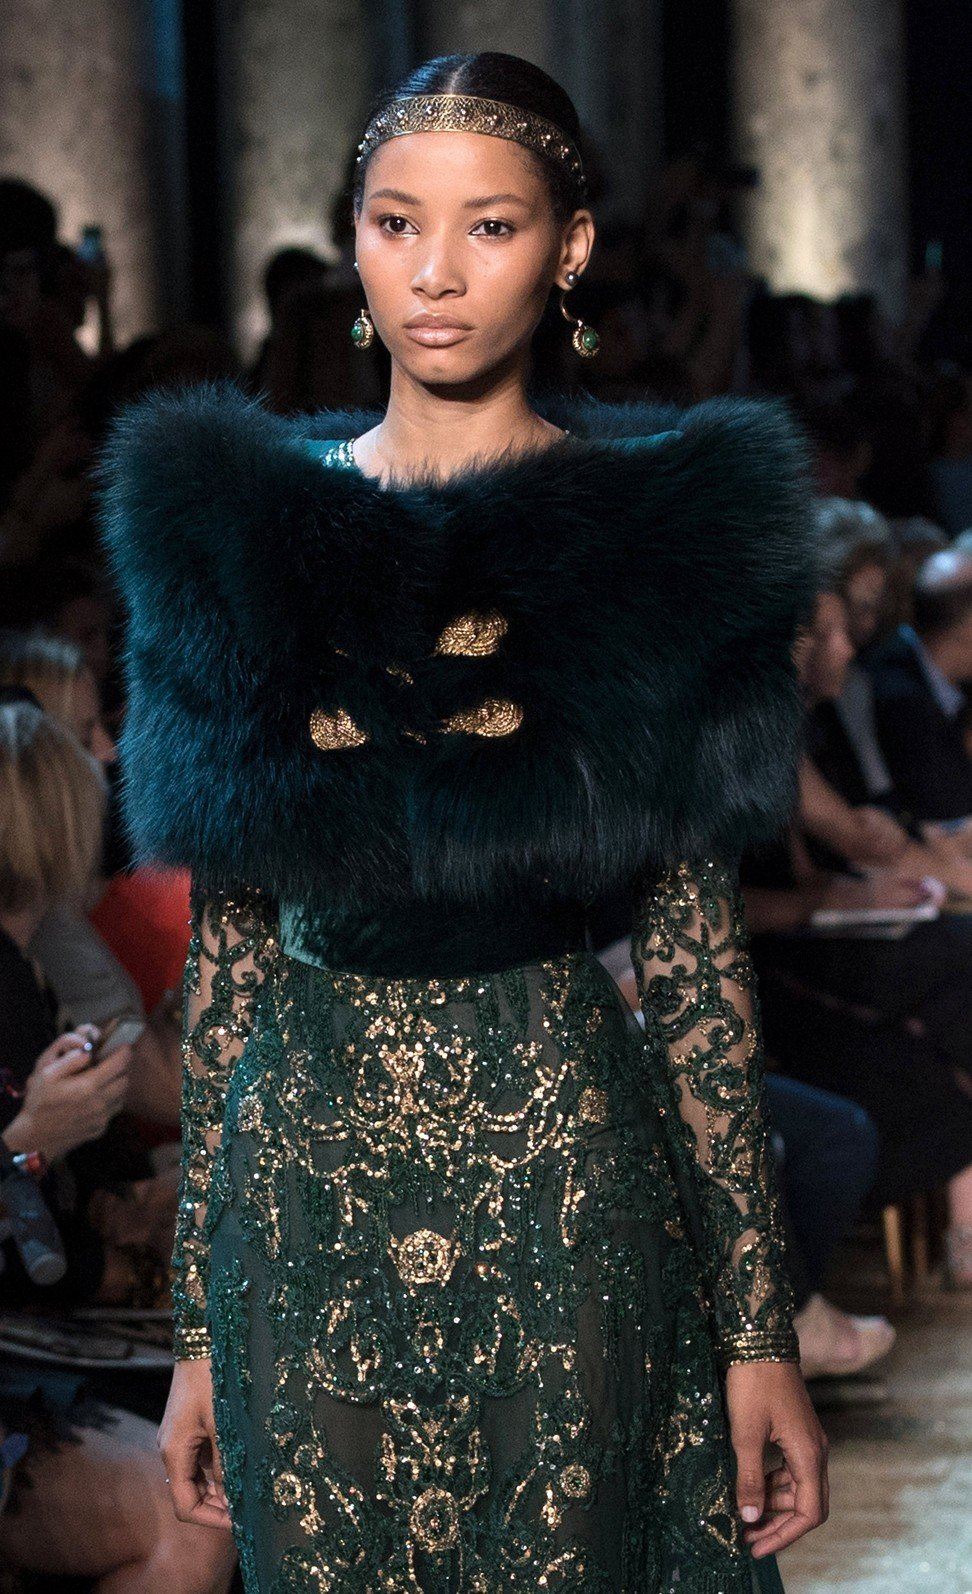 Dominican model Lineisy Montero commanded attention in her beaded green ensemble. Photo: EPA